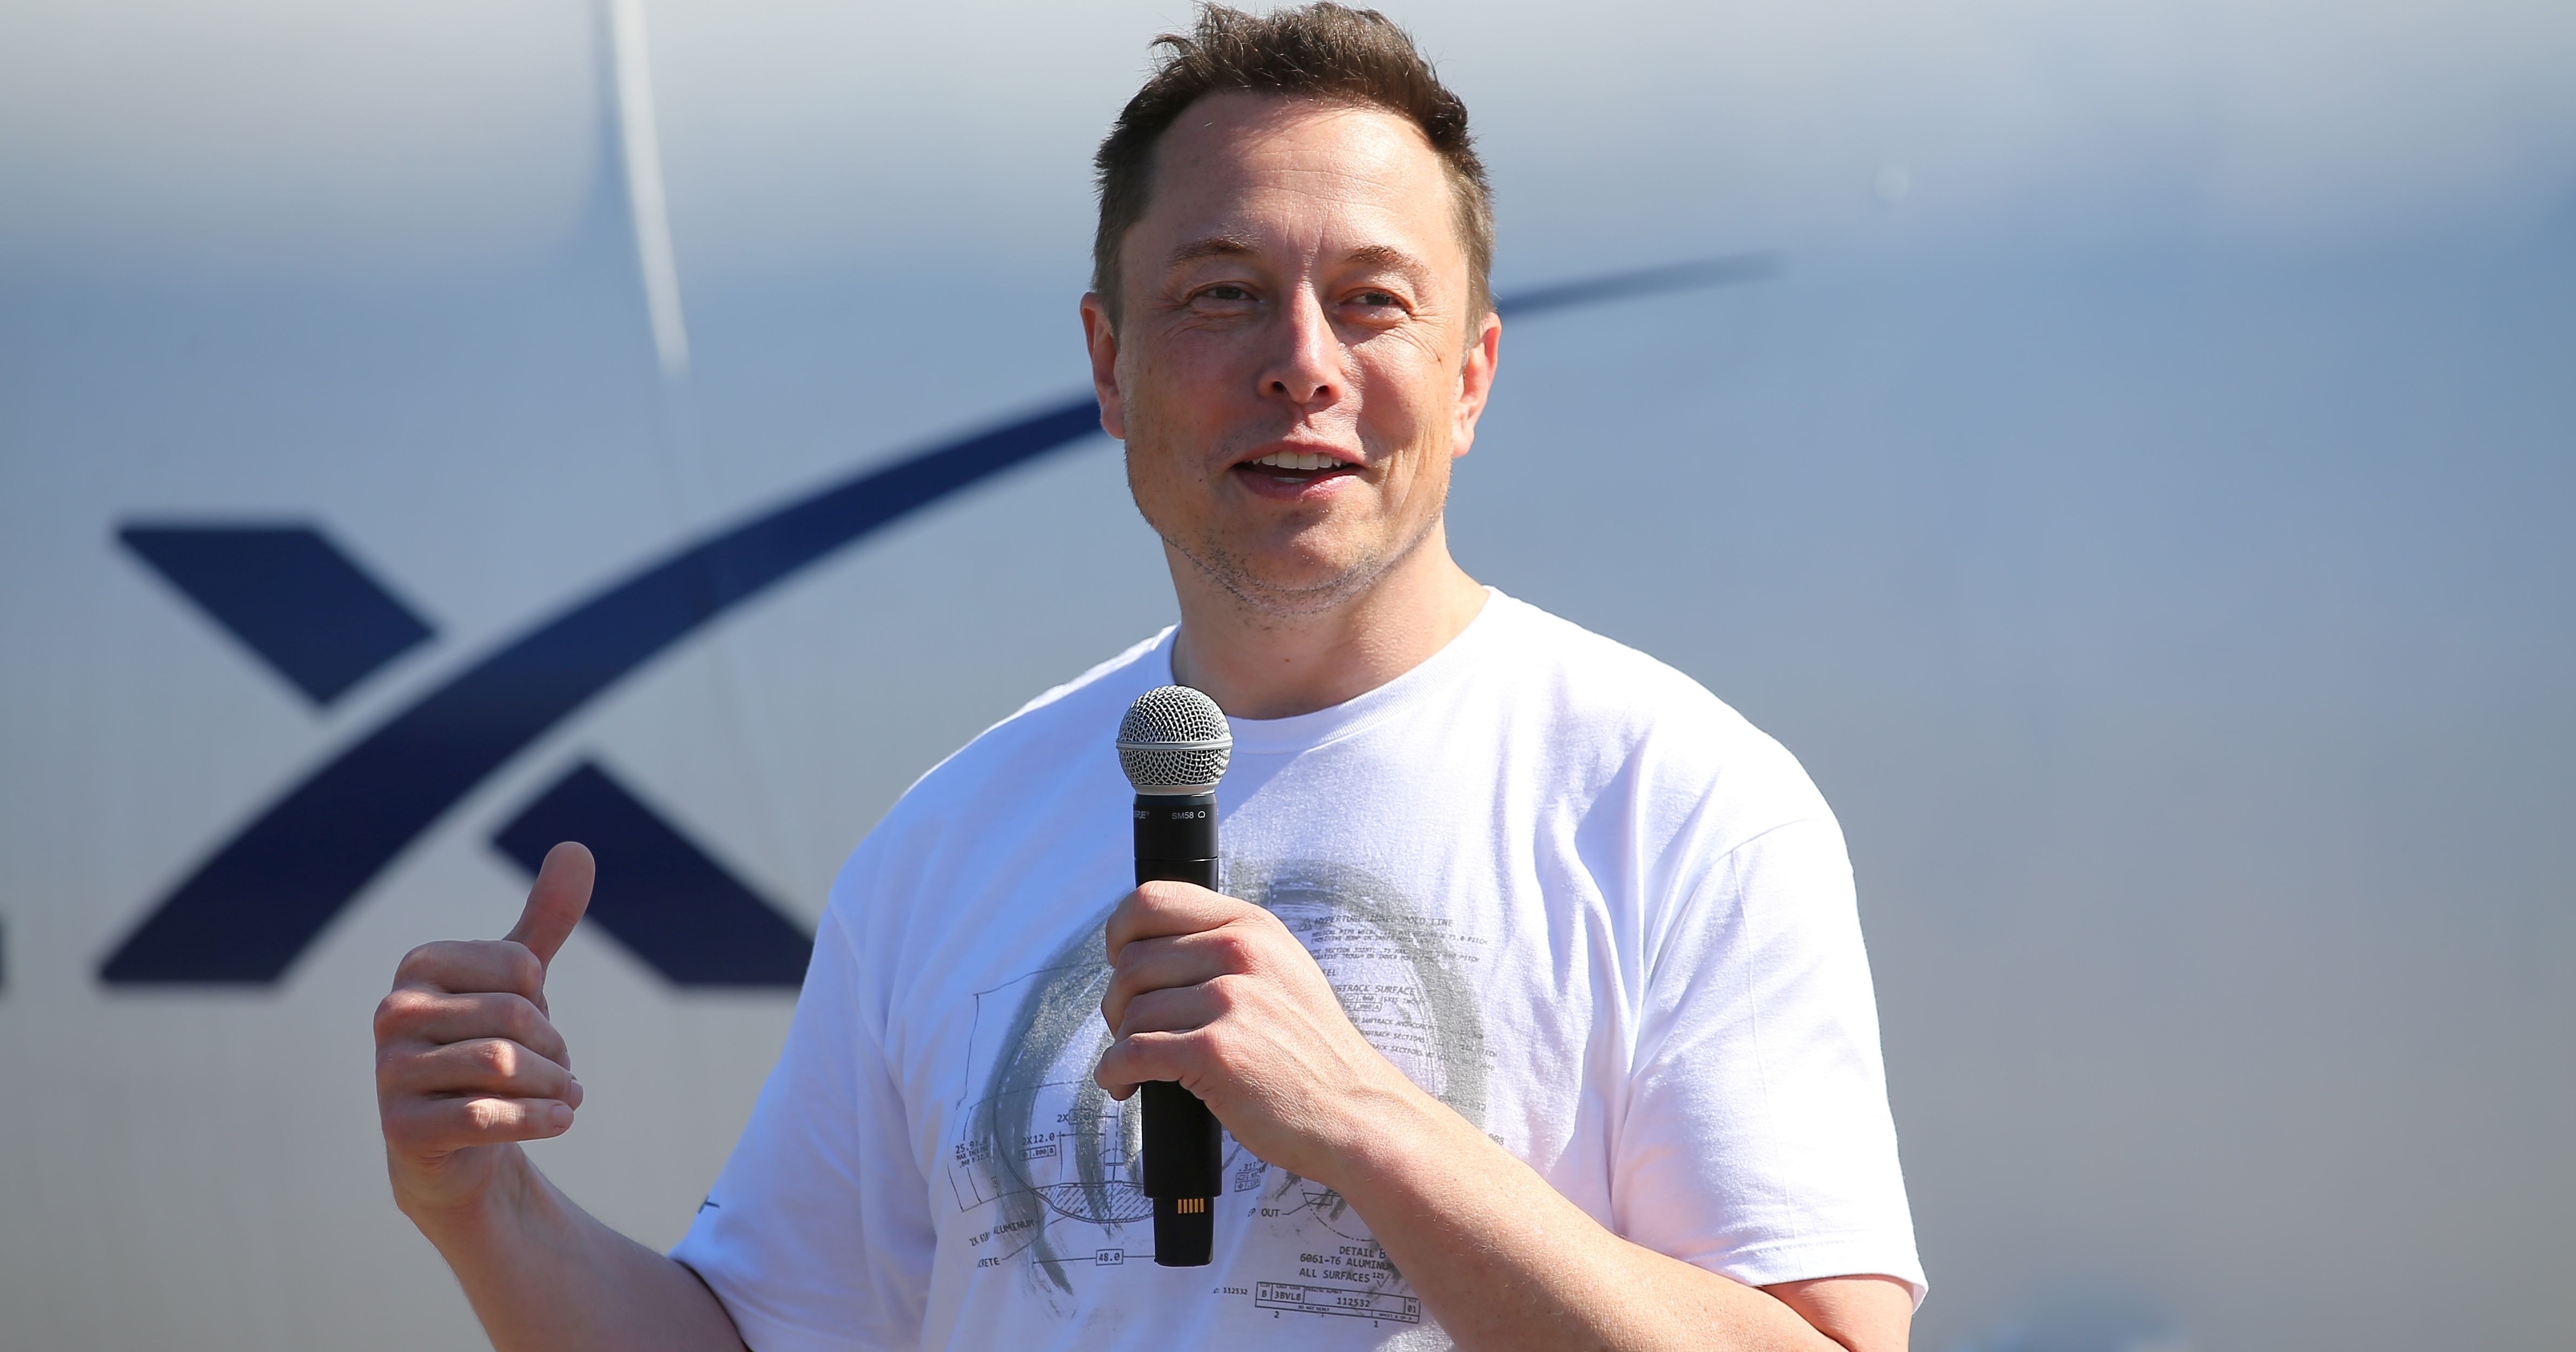 Elon Musk Doesn't Have A Desk In His Office, Even Sleeps On His Factories' Floors